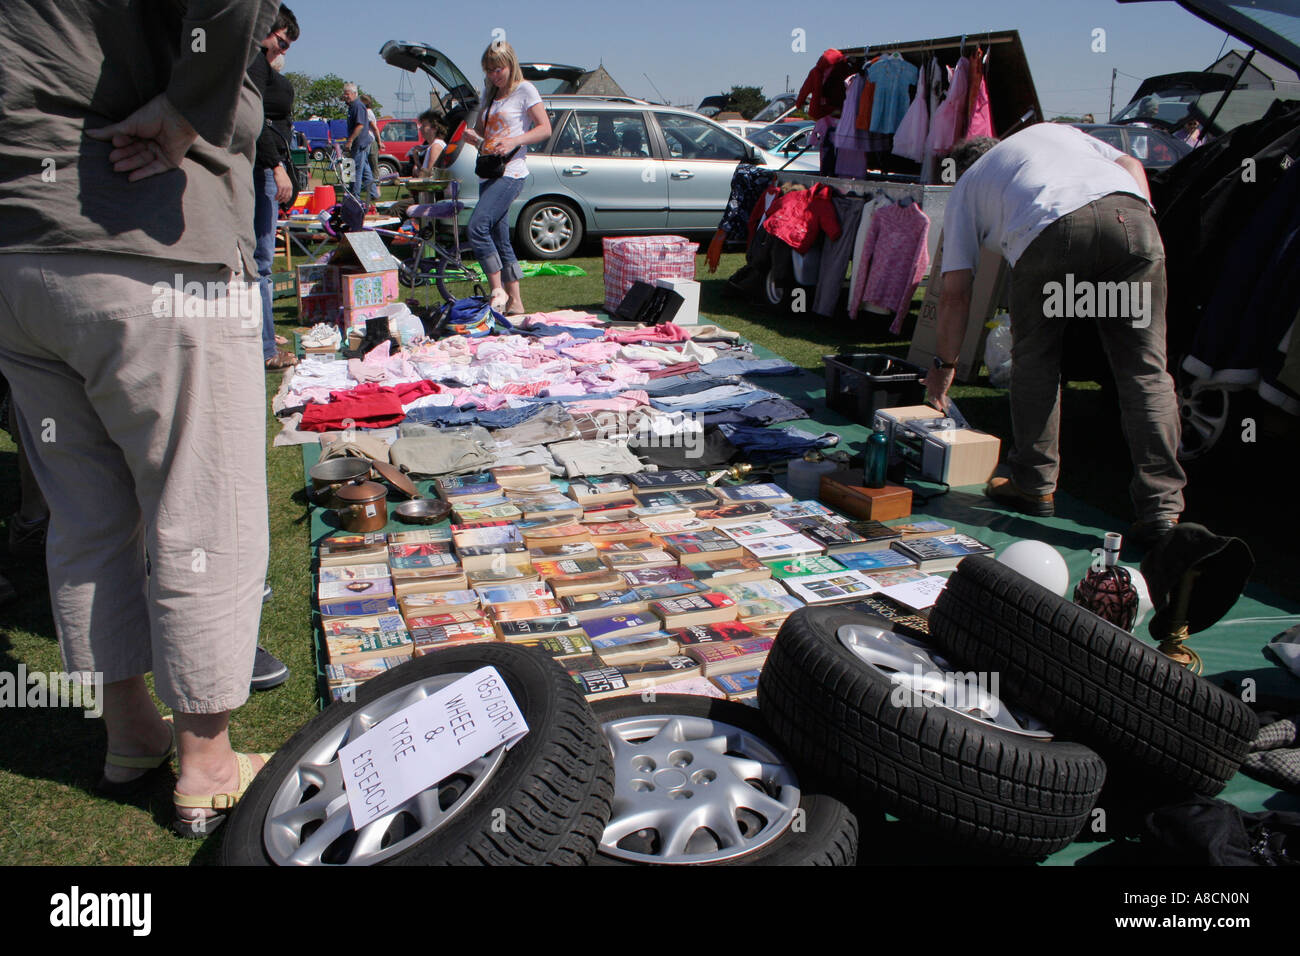 Car Boot Sale Cornwall UK Banque D'Images